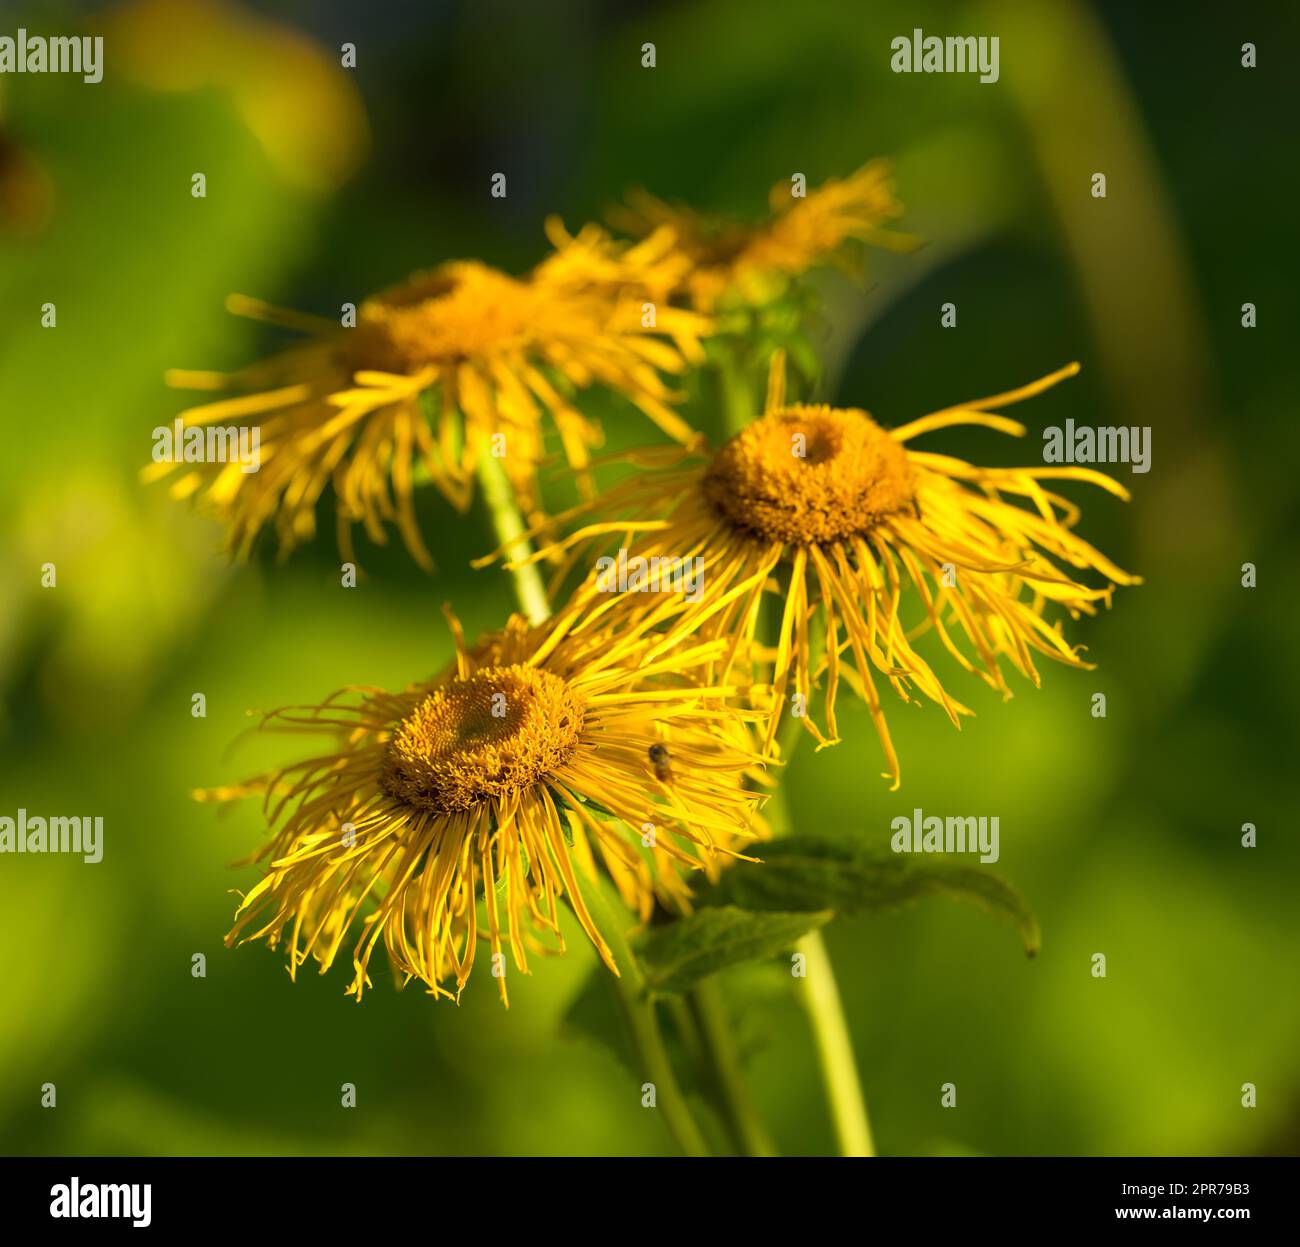 Closeup of withered and dried daisies in a field in autumn. Dying pollinated flowers with yellow pistils in a garden or backyard. Group of marguerite shedding in a park during the fall season Stock Photo